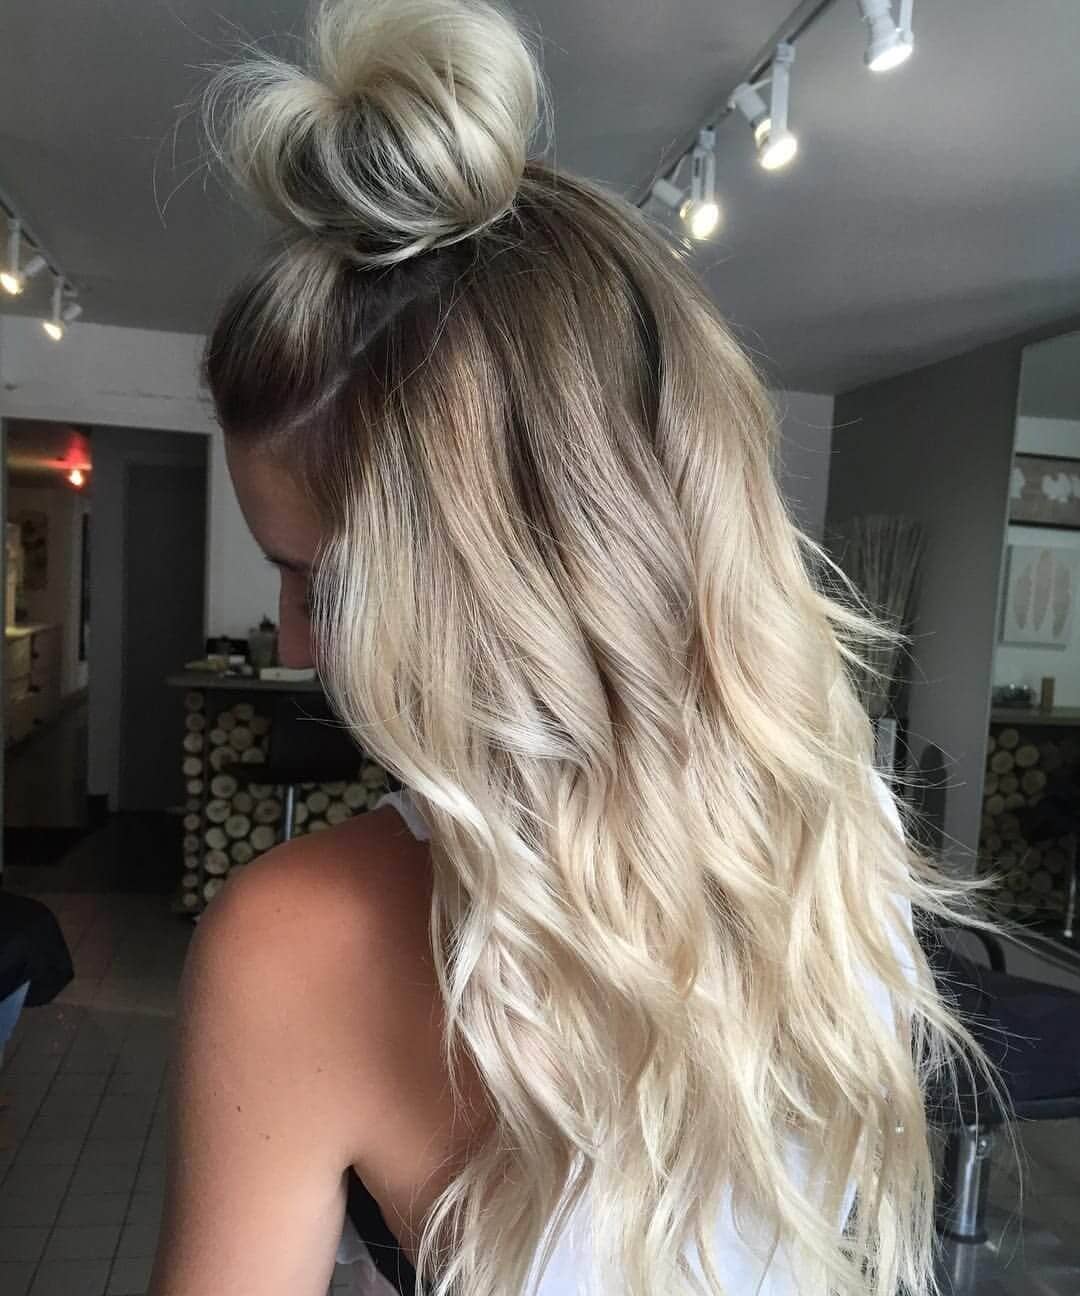 Platinum blonde ombre with cute top knot